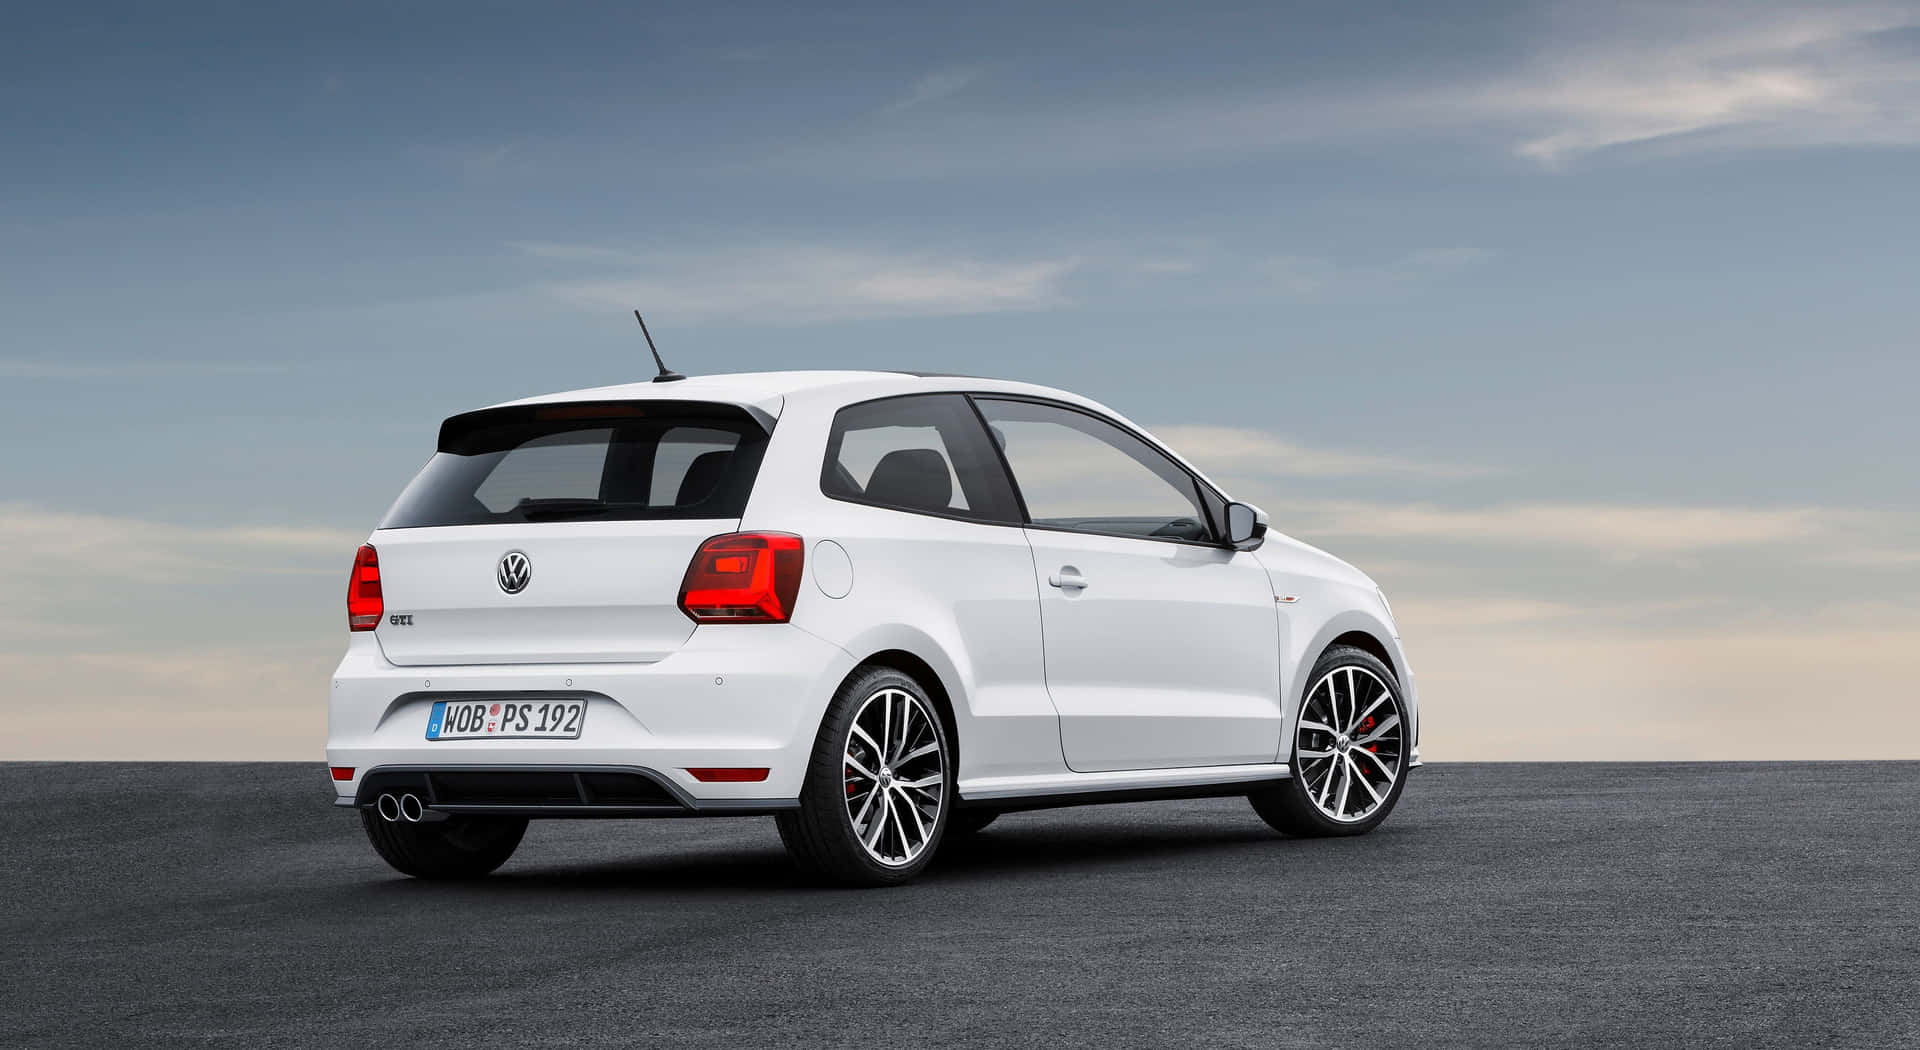 The Sleek And Stylish Volkswagen Polo In Action Wallpaper